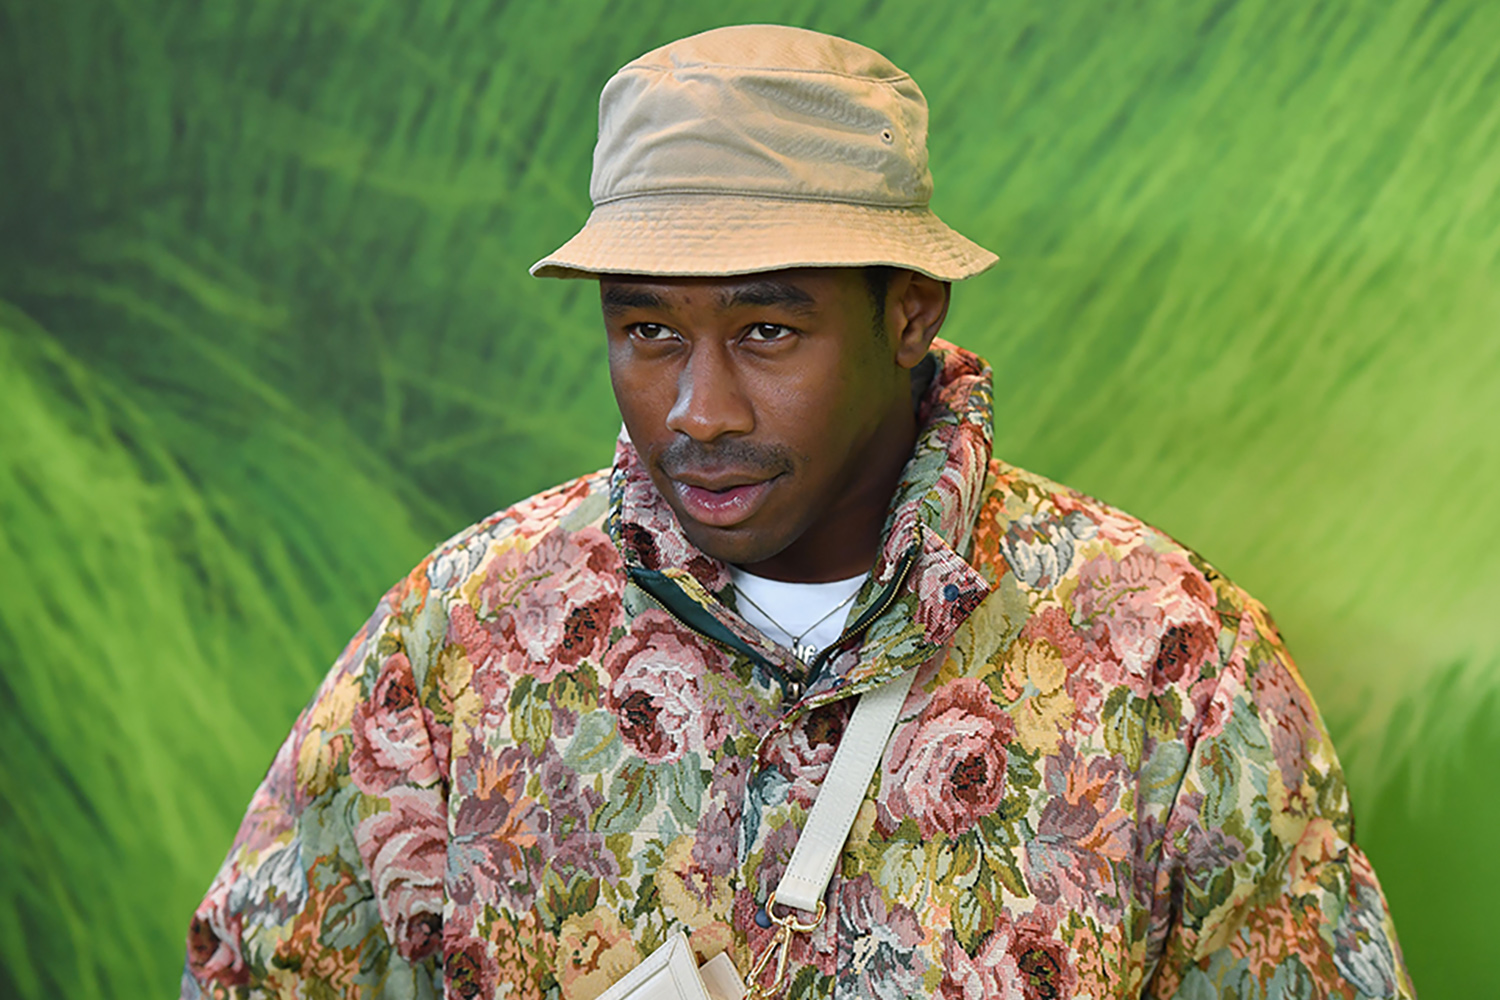 Tyler, the Creator as a Fashion Influence